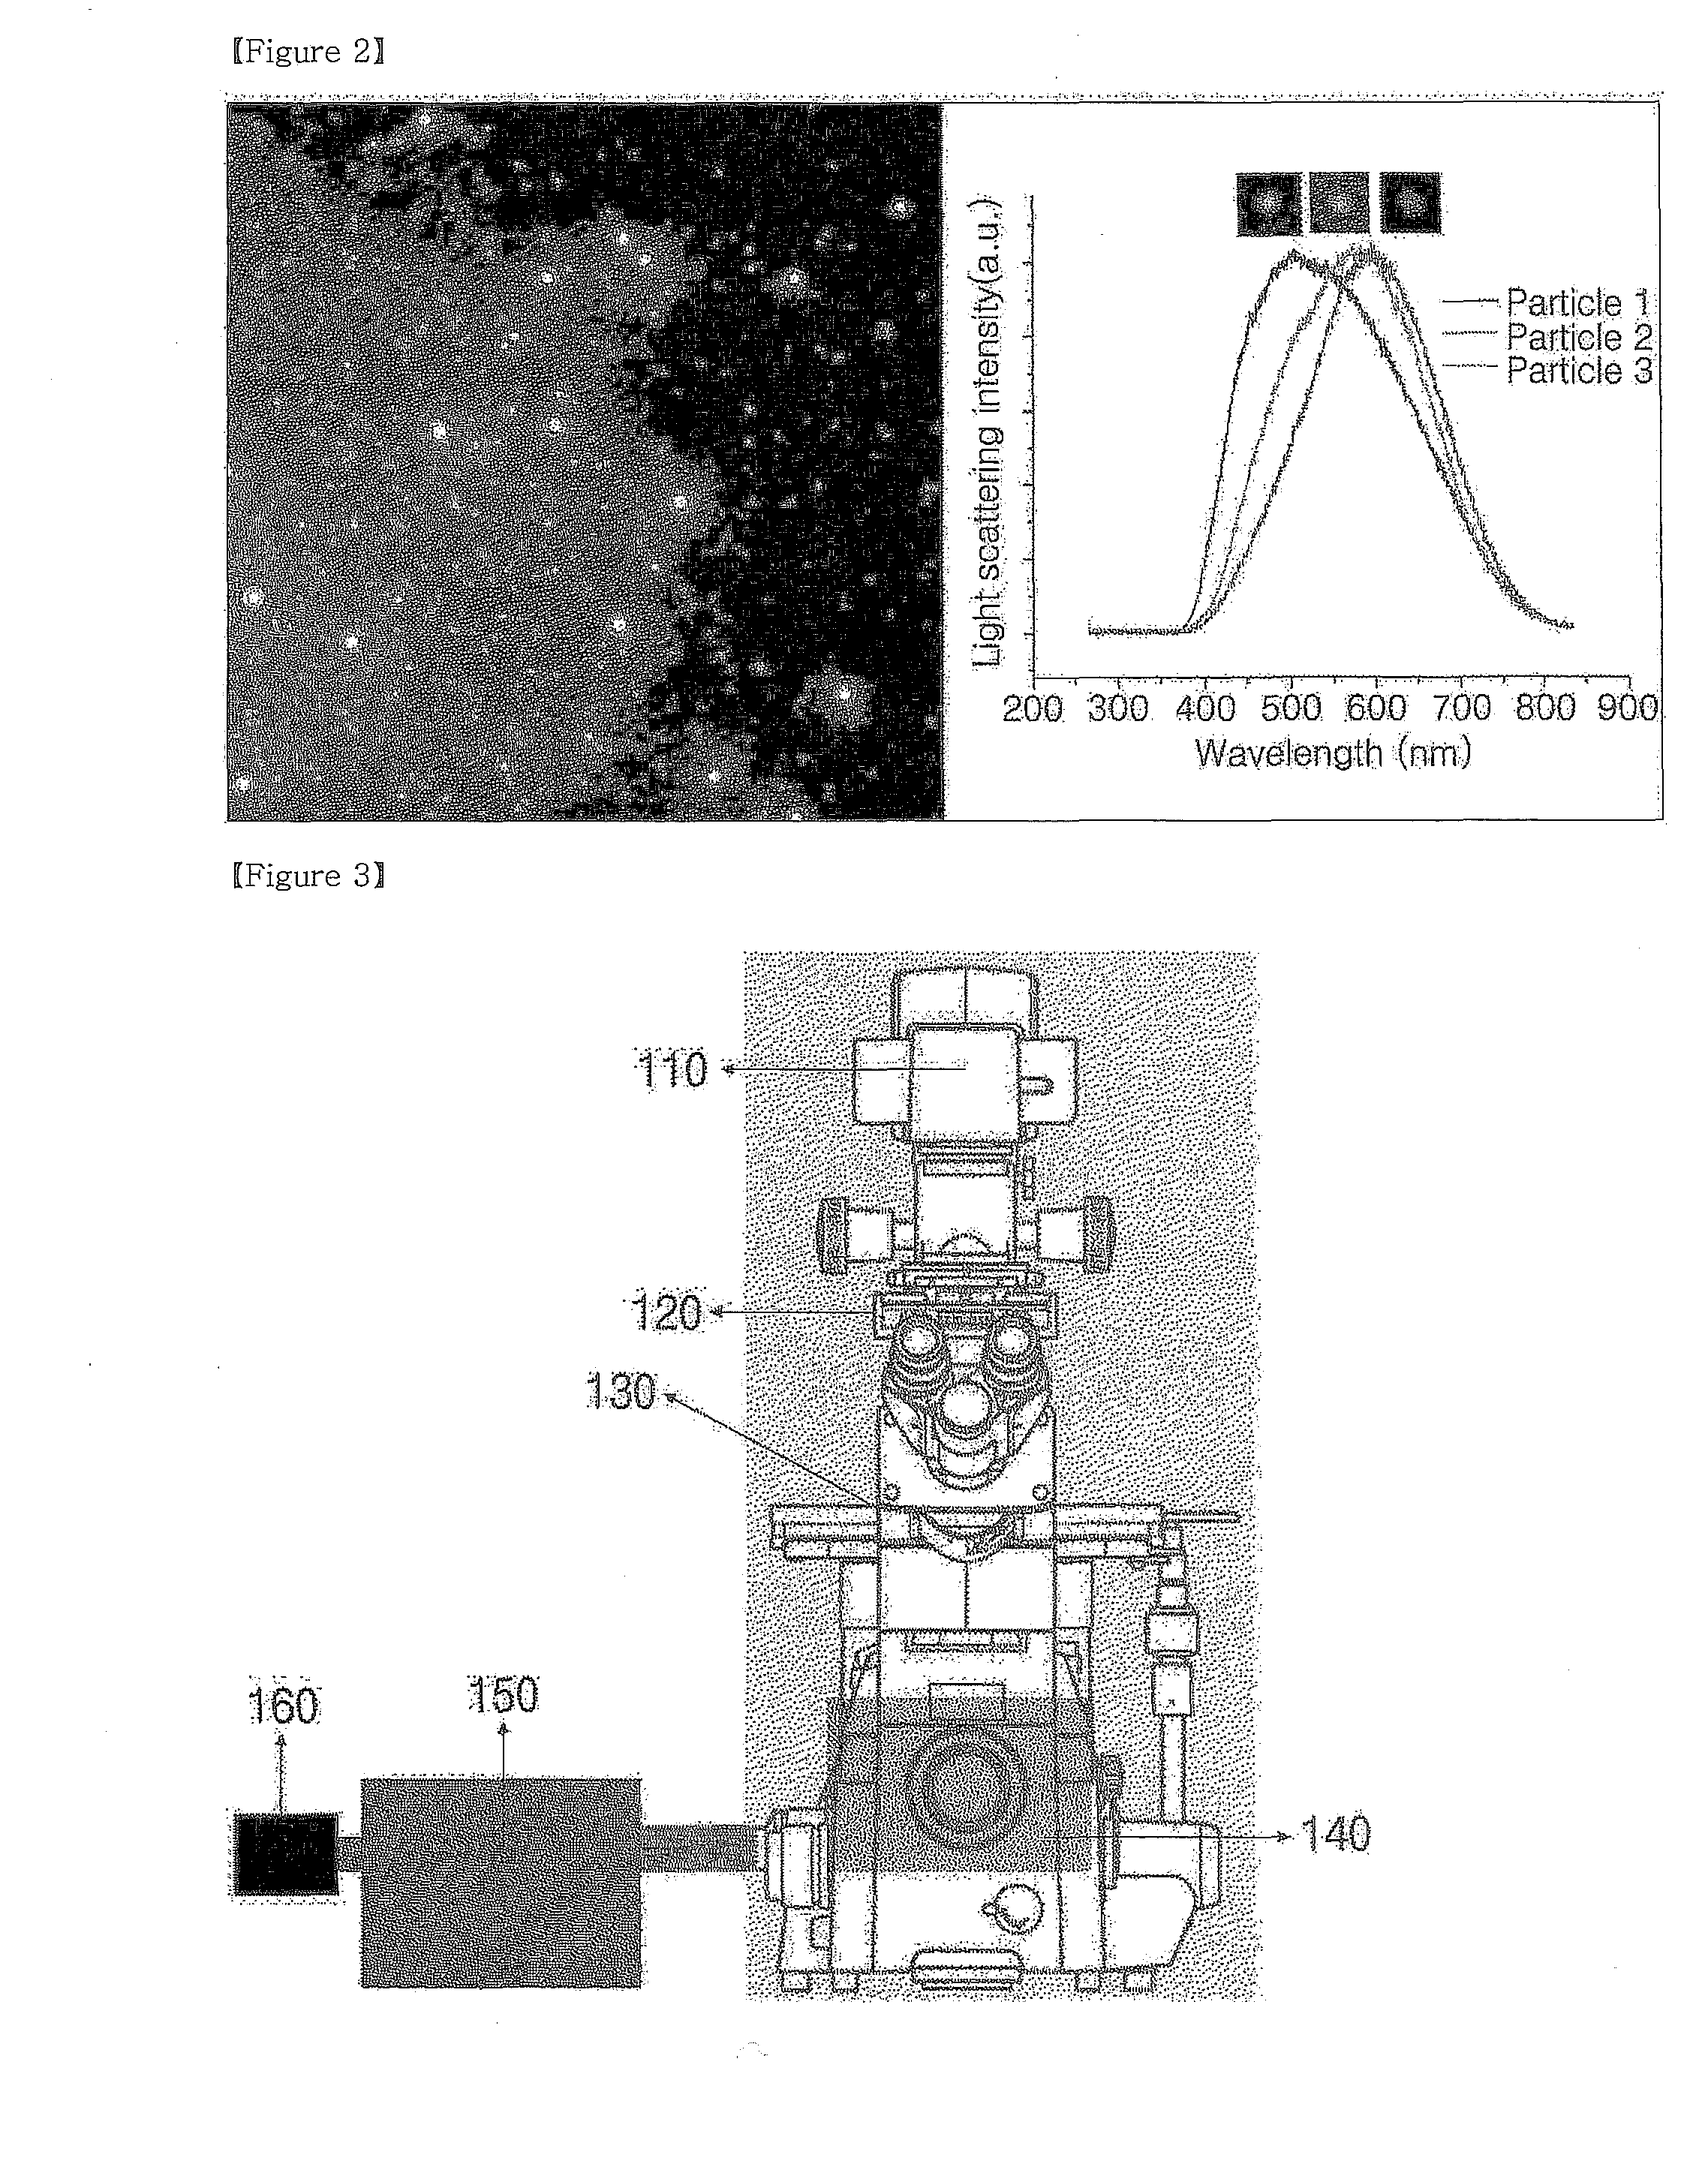 Method of detecting bioproducts using localized surface plasmon resonance sensor of gold nanoparticles